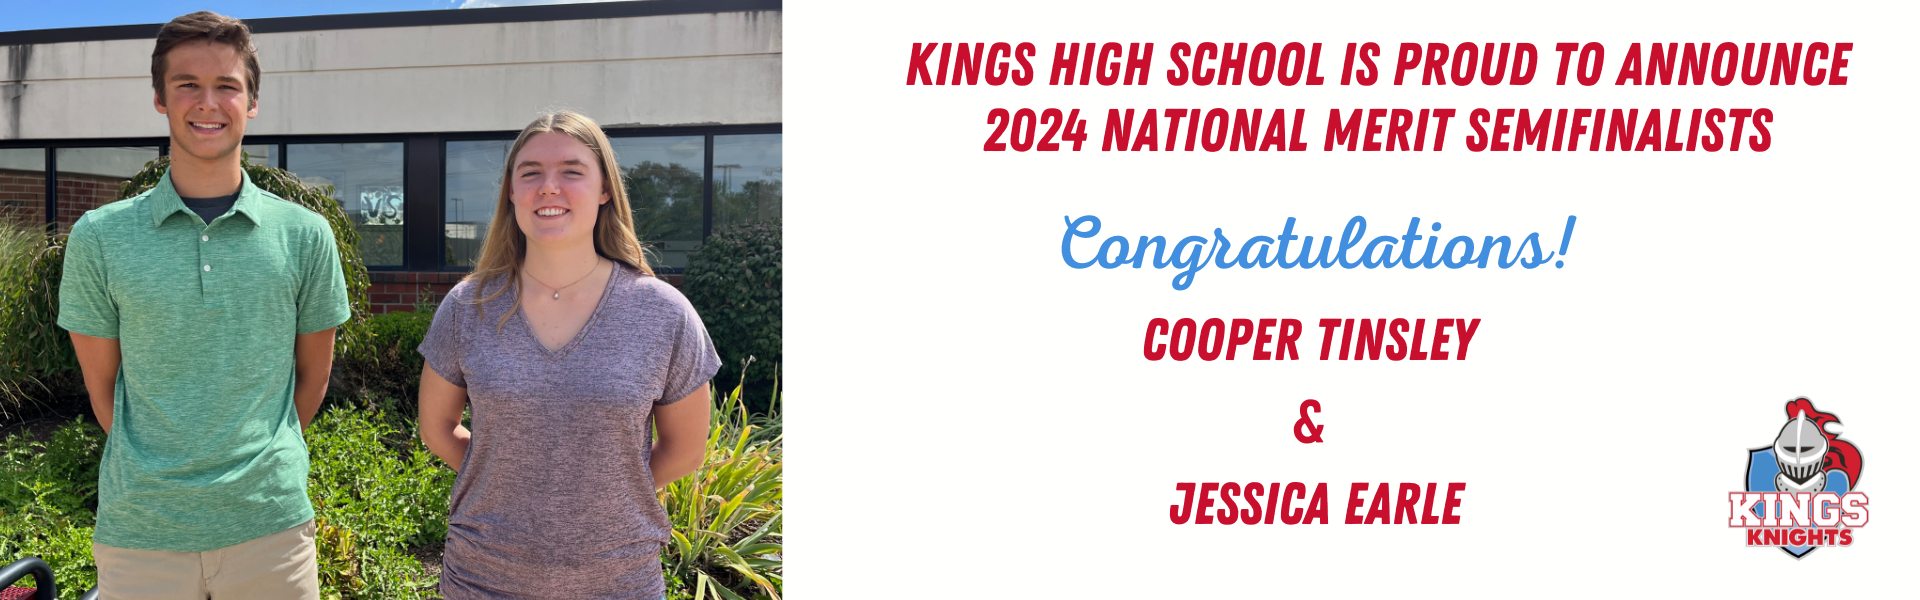 KHS 2024 National Merit Semifinalists Jessica Earle and Cooper Tinsley